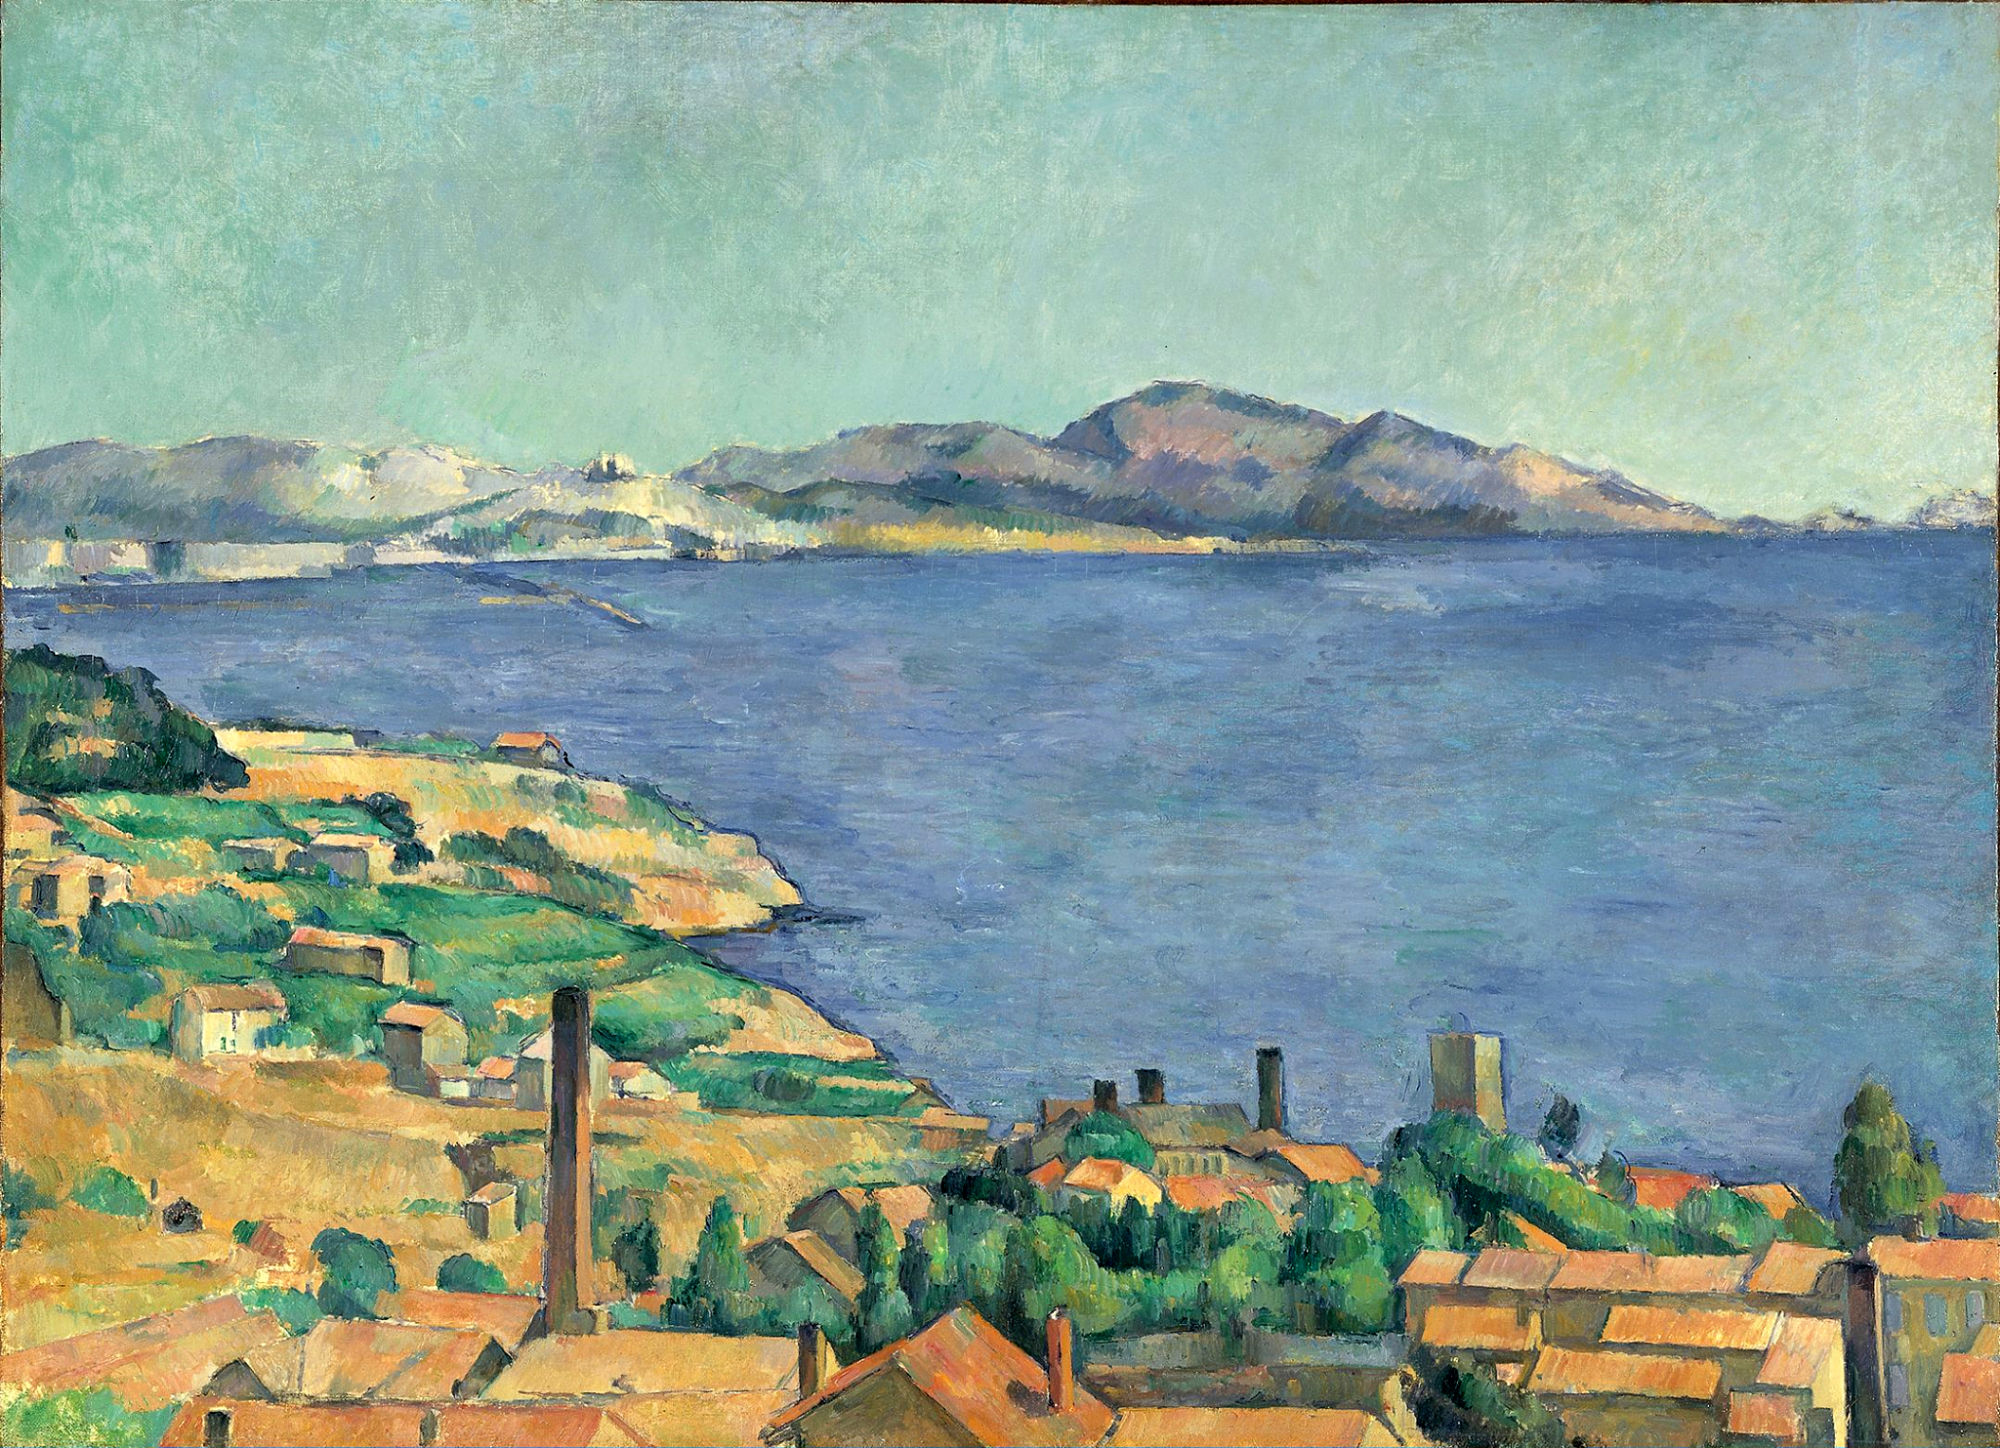 The Gulf of Marseilles Seen from L'Estaque, Paul Cézanne c1885, Musée d'Orsay.